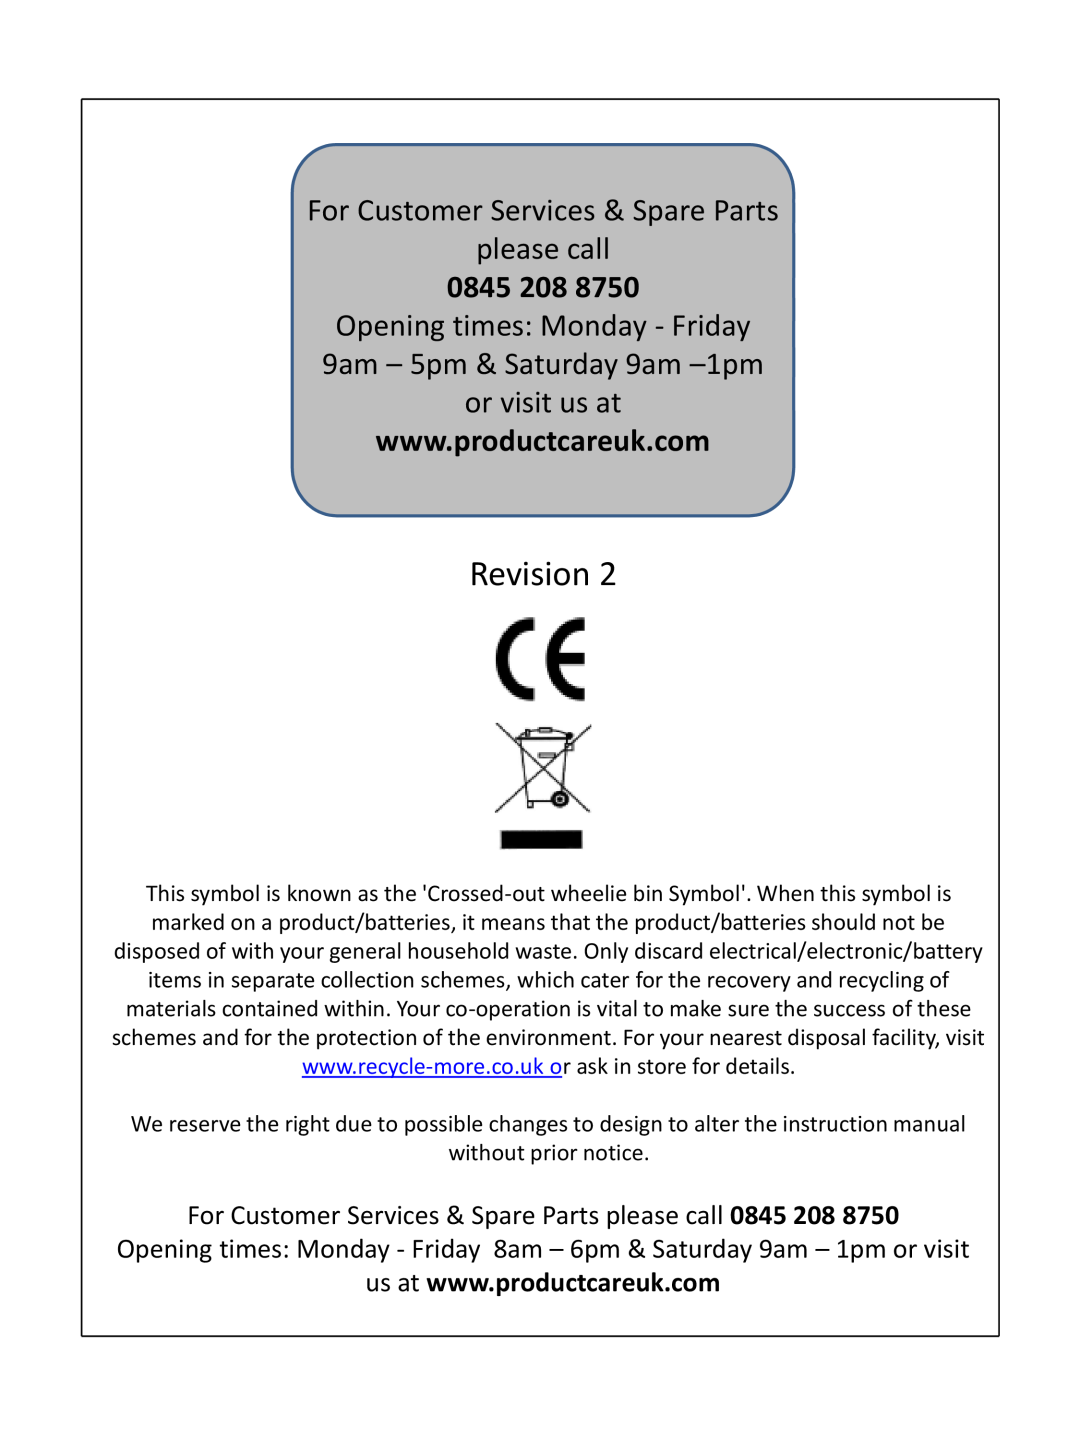 Russell Hobbs RHUCFZ55(B) instruction manual Revision, For Customer Services & Spare Parts please call, 0845 